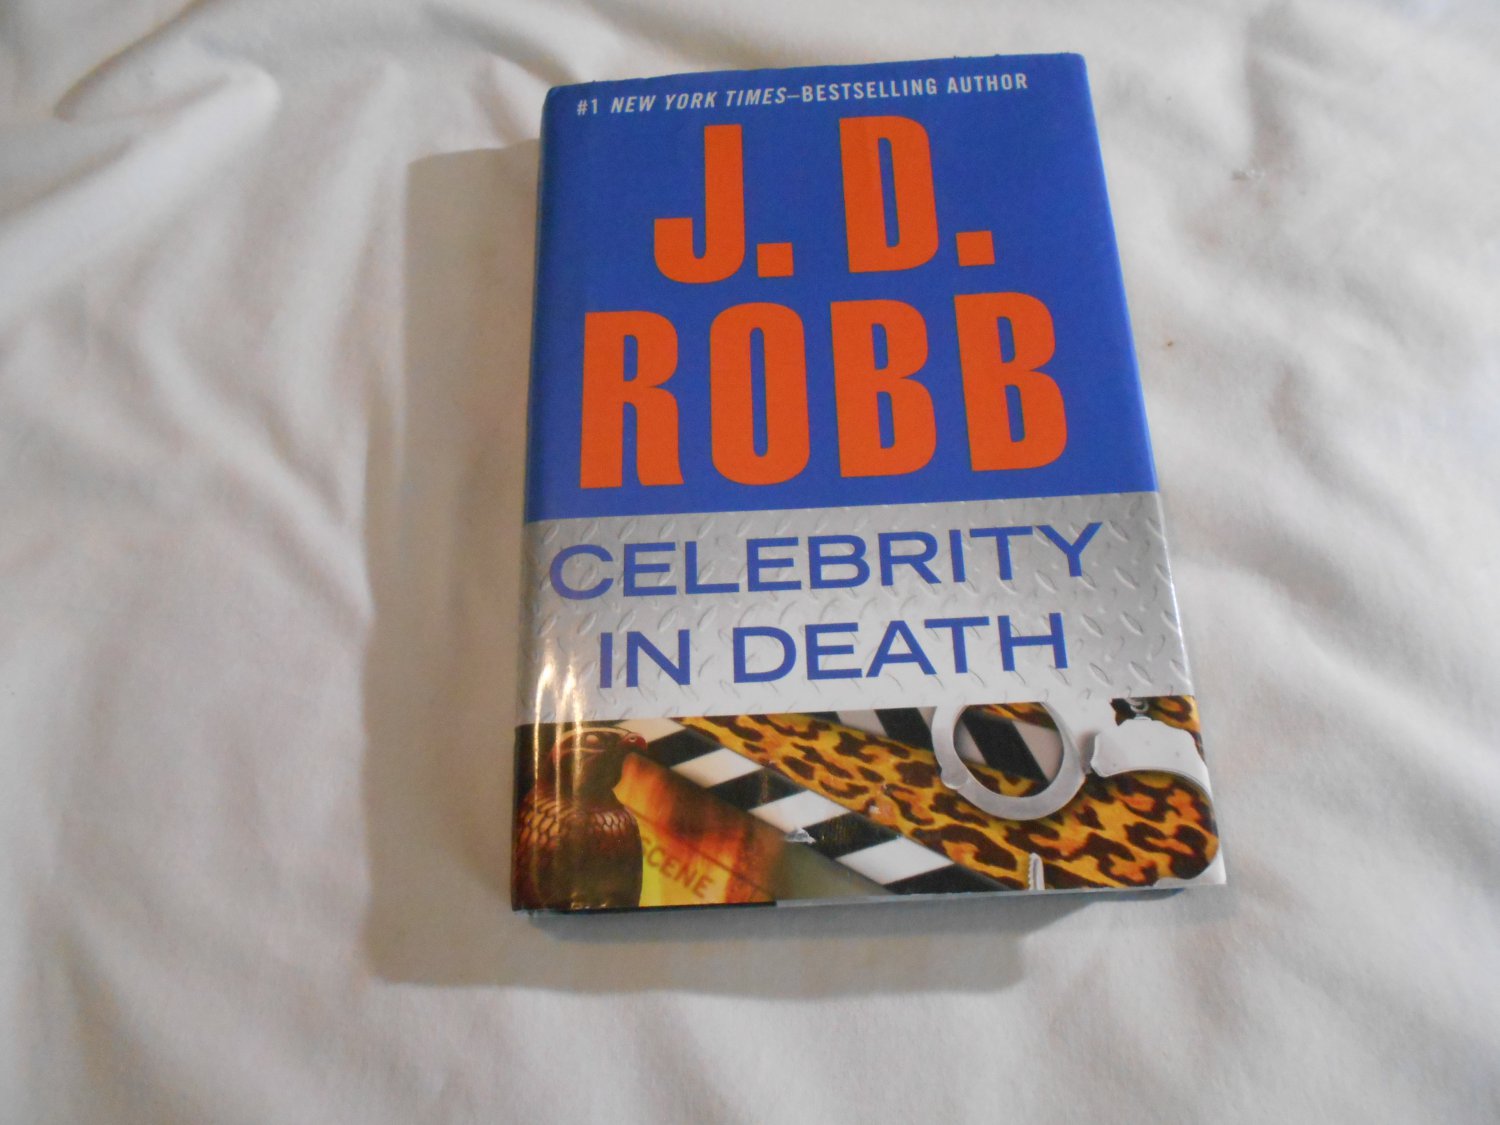 Celebrity in Death by J.D. Robb, Nora Roberts (2012) (145) In Death #34, Romantic Suspense